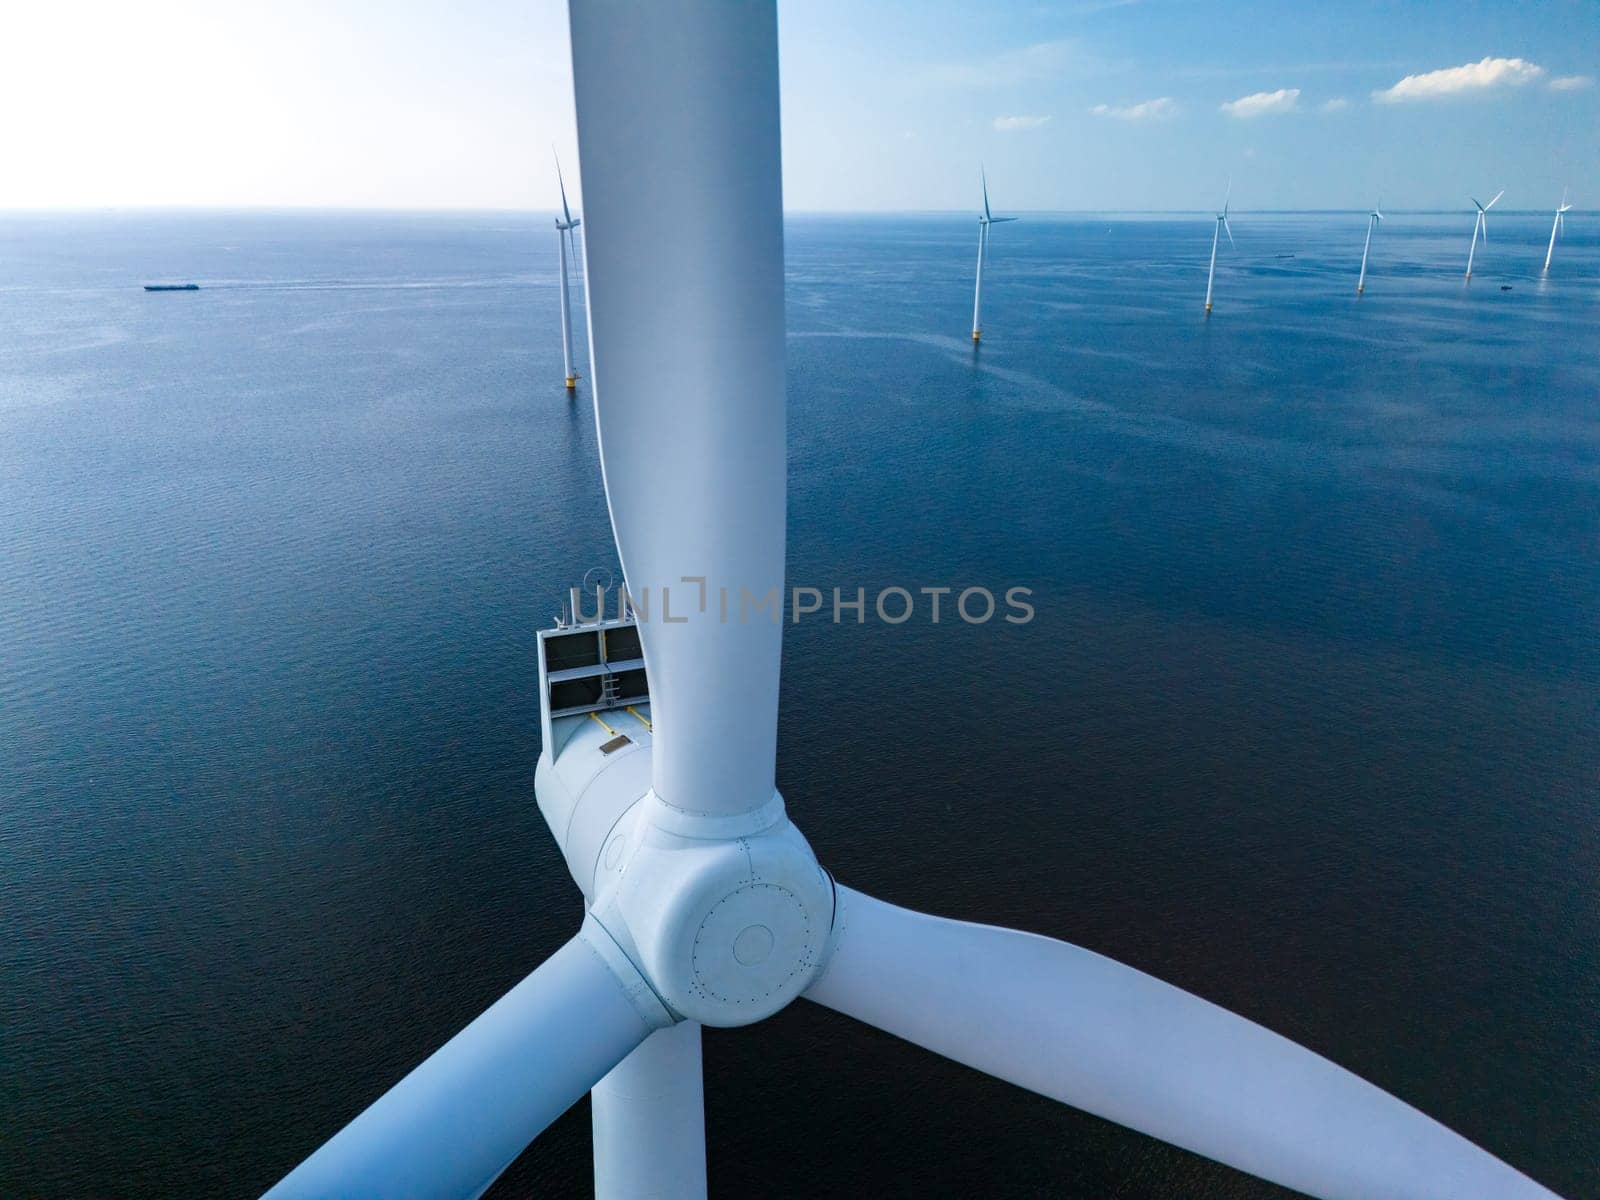 A majestic wind turbine stands tall in the middle of the ocean, harnessing the power of the wind to generate clean, sustainable energy for the surrounding area.